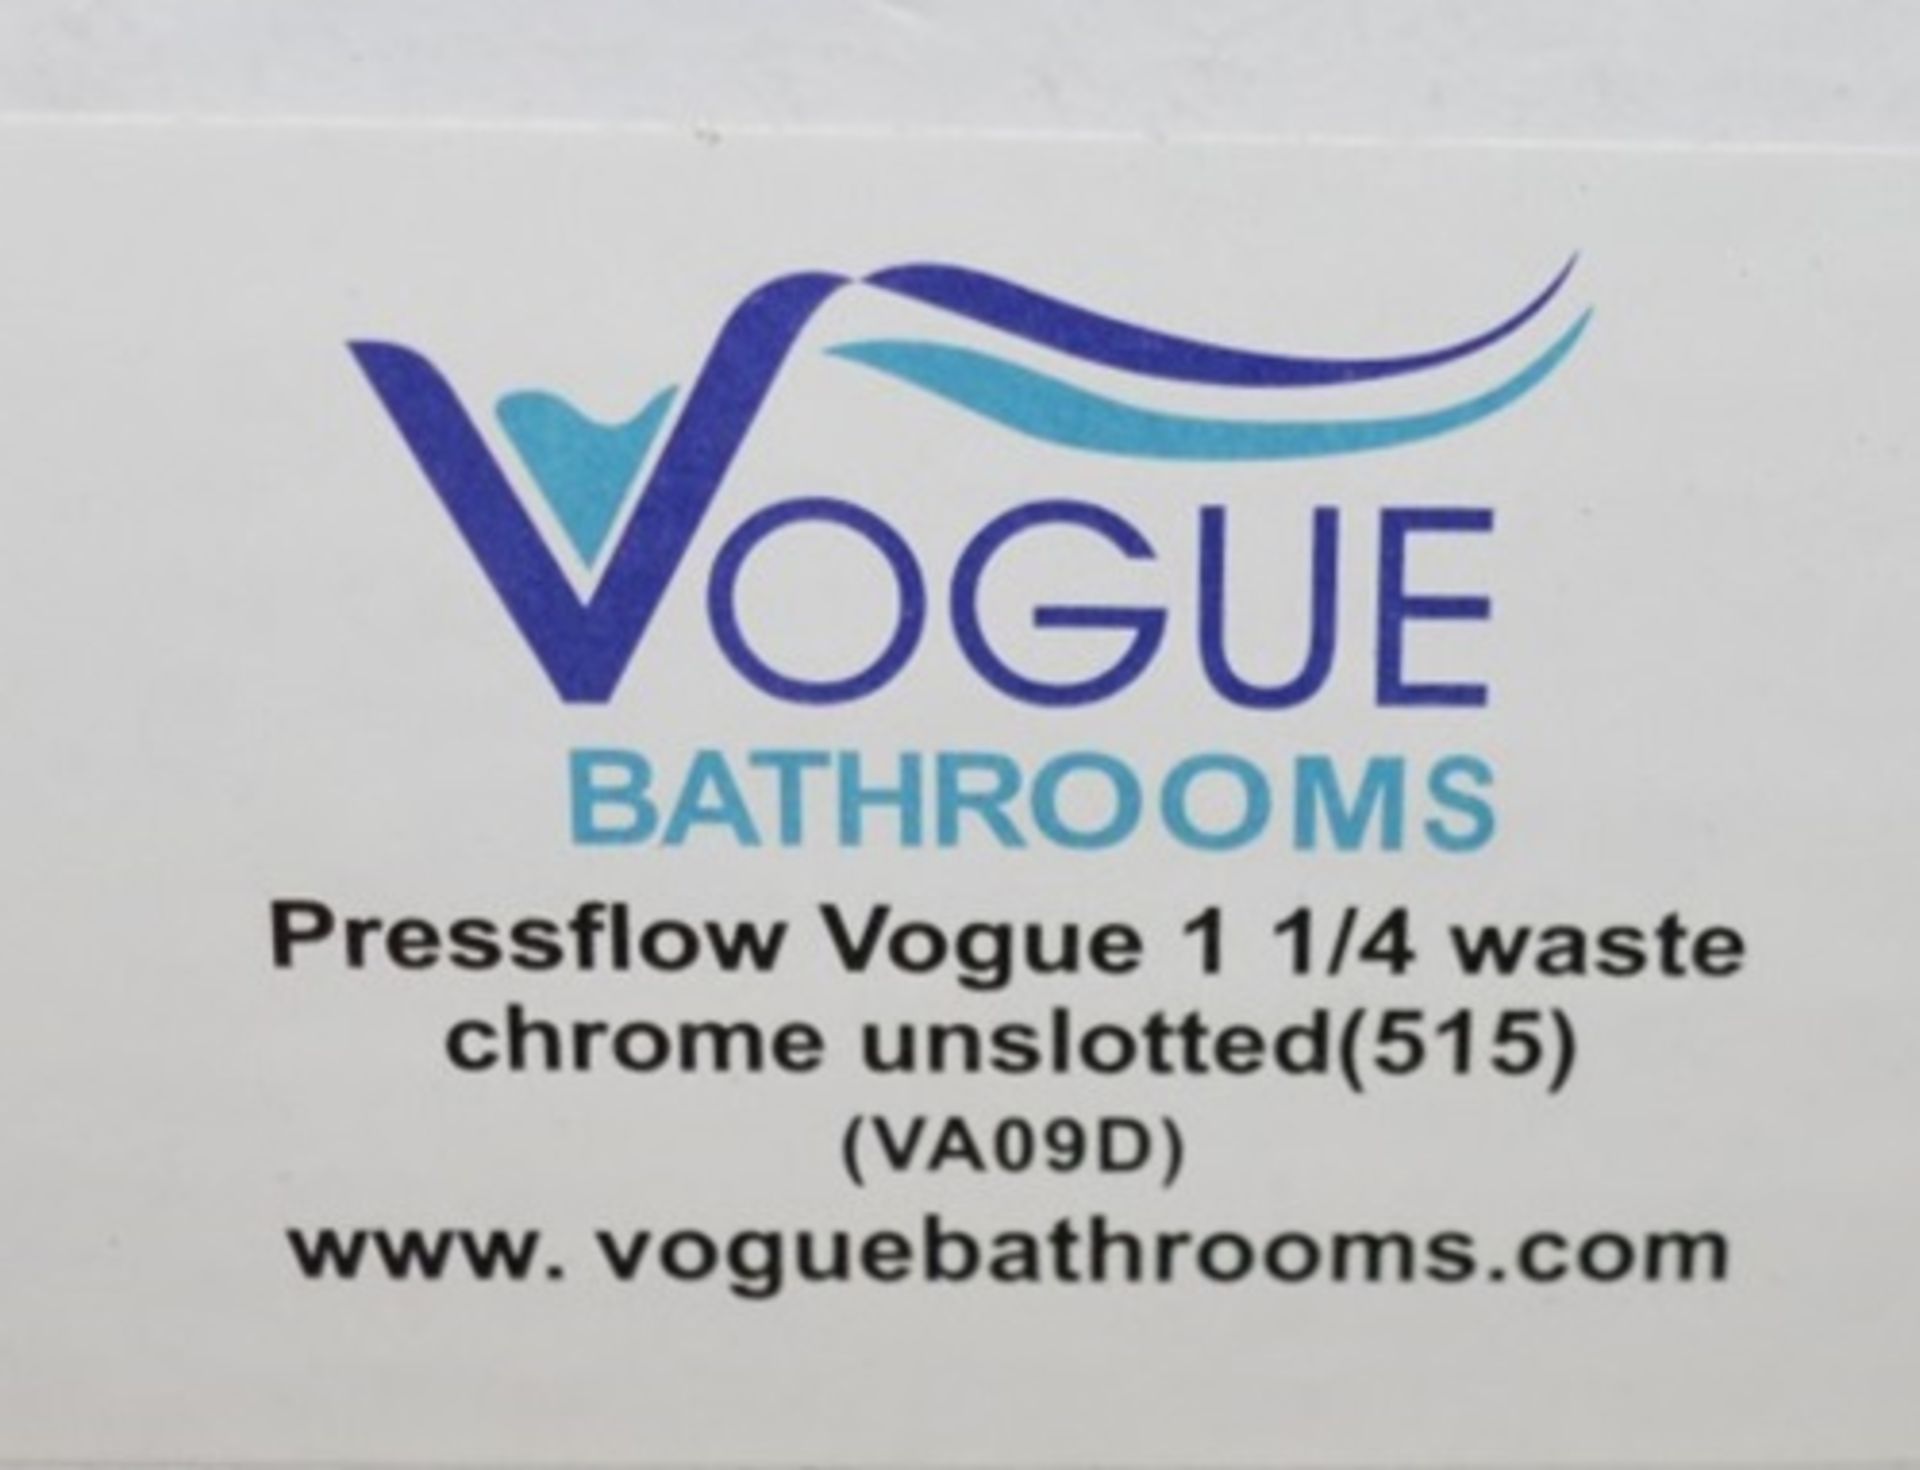 20 x Vogue Bathrooms Pressflow 1 1/4 Unslotted Waste Chrome Waste Fittings - VA09D - Brand New Stock - Image 2 of 5